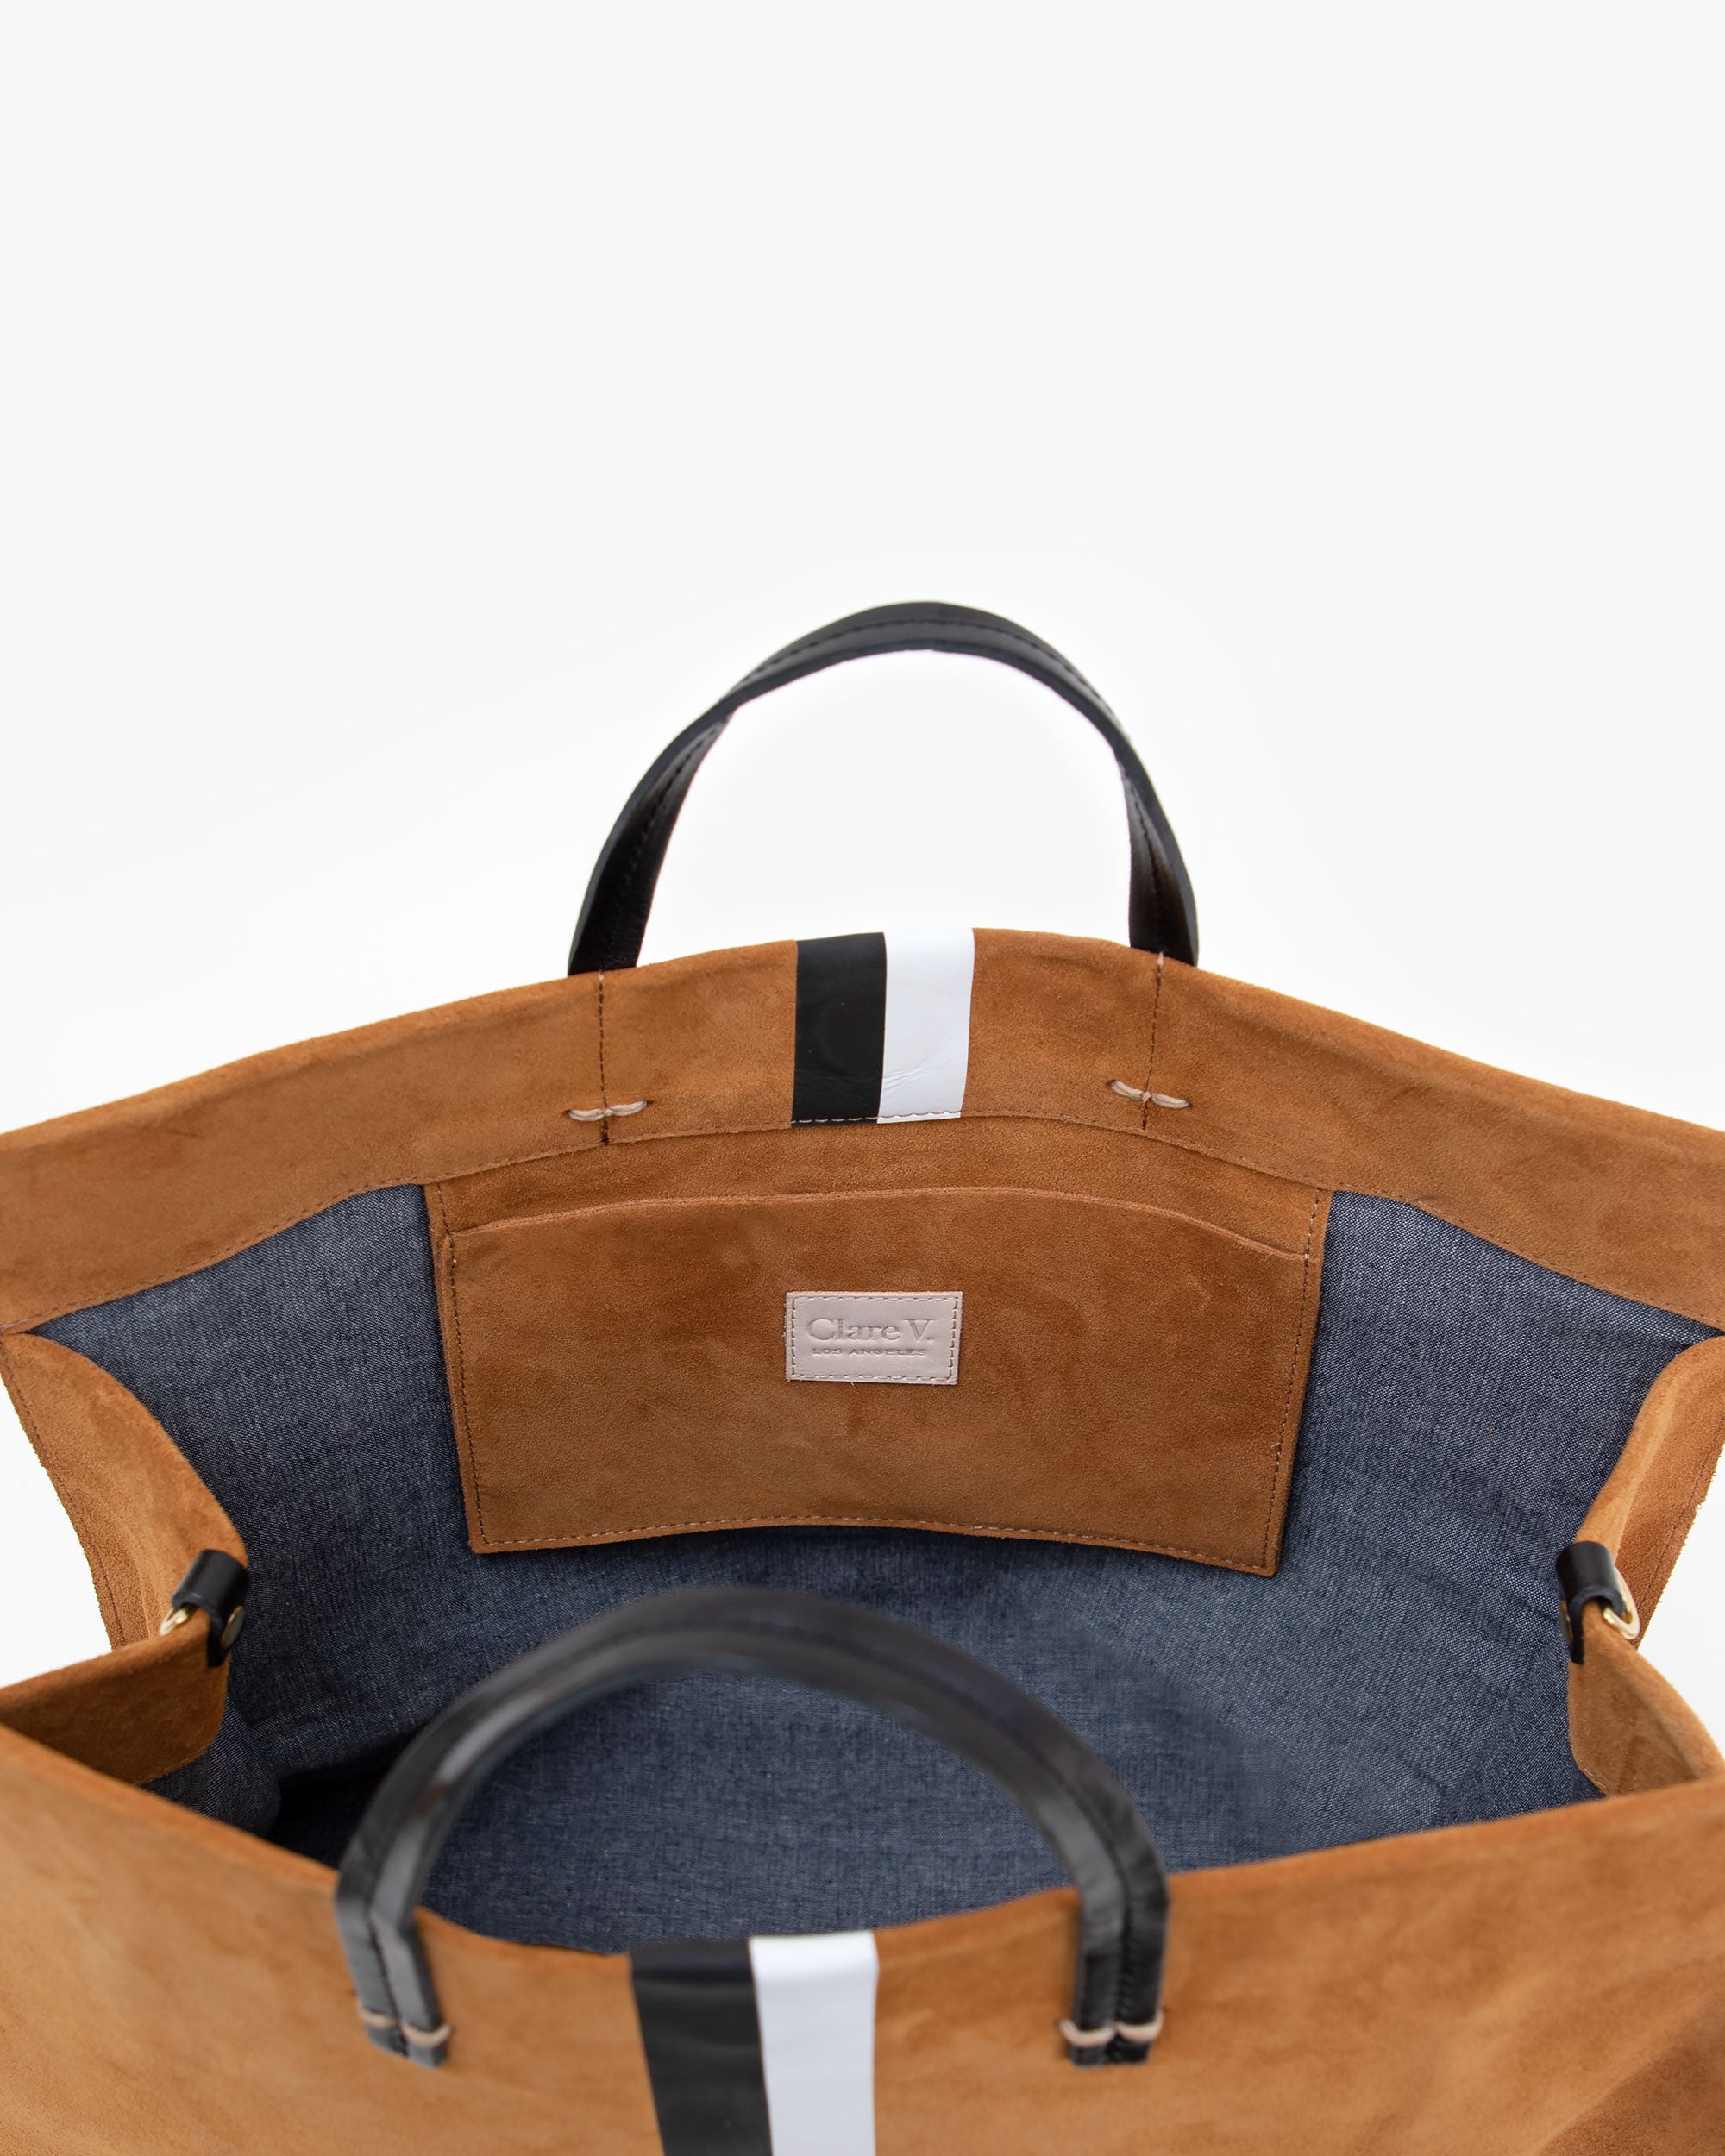 Clare V. Petit Simple Tote - Army Suede Stripe